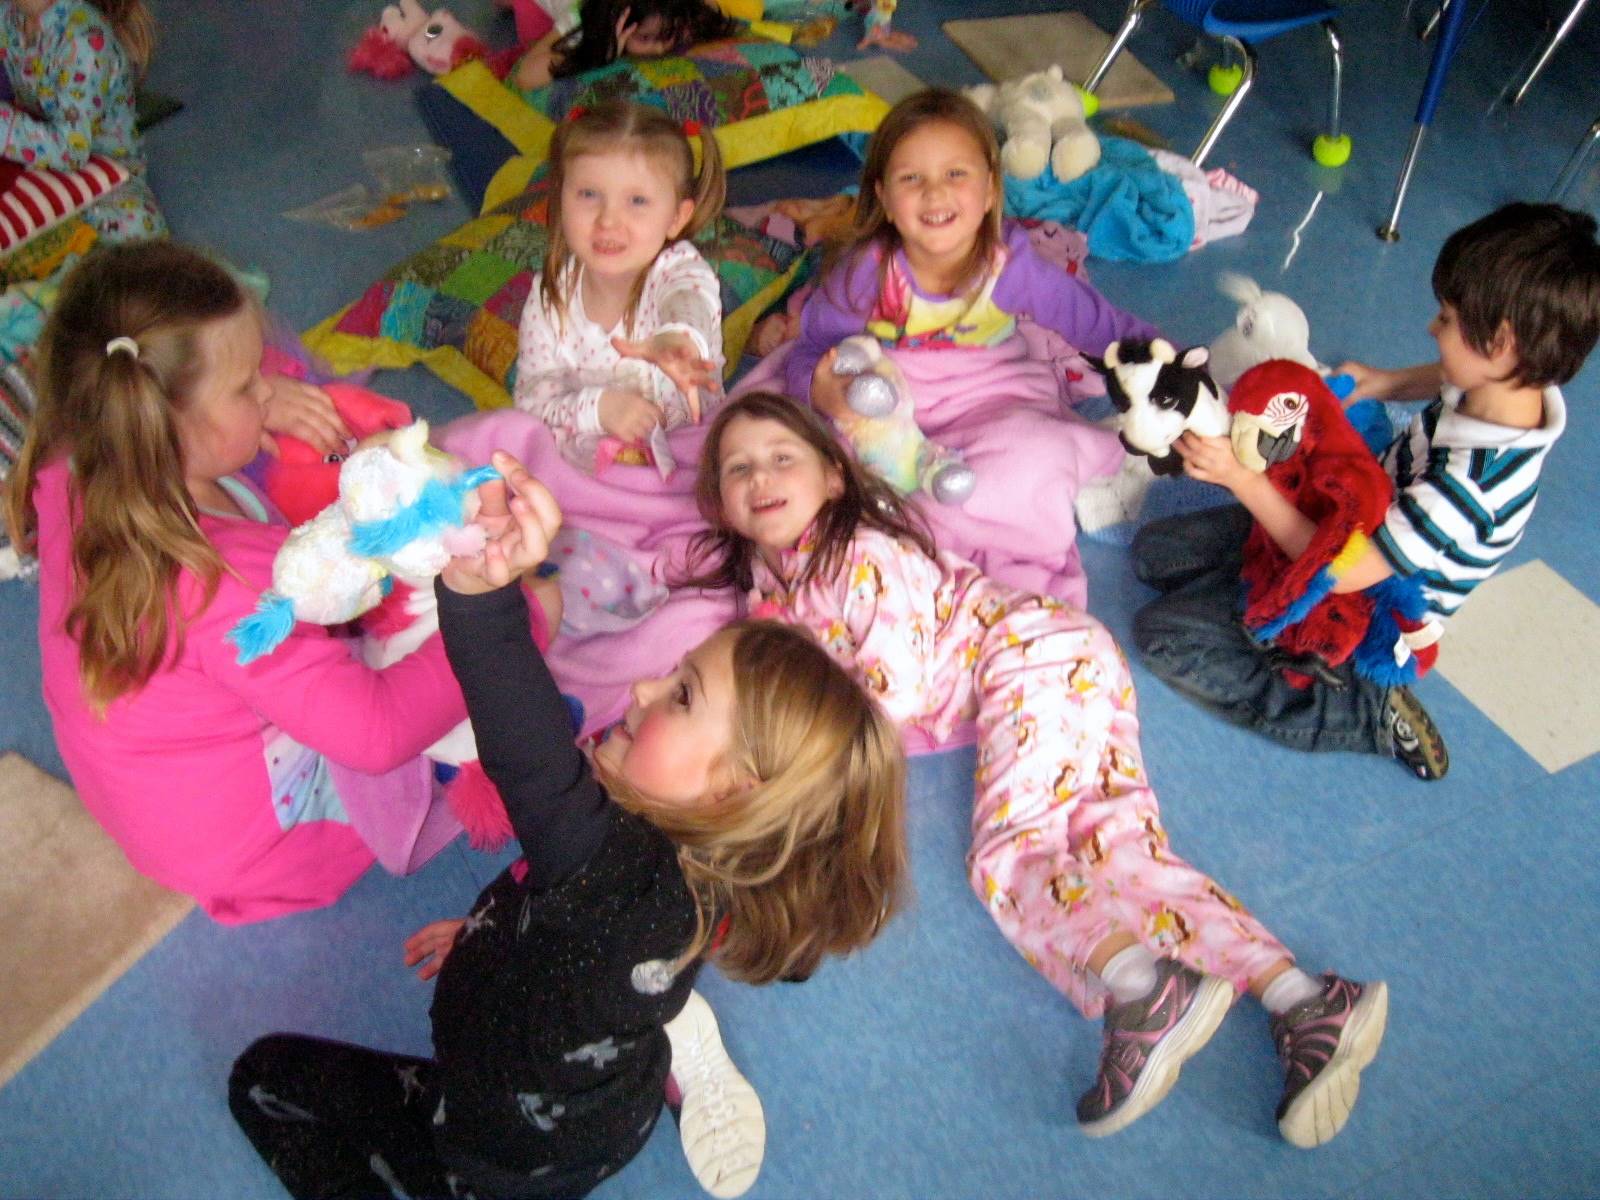 PAJAMA Party with blankets and stuffy's!